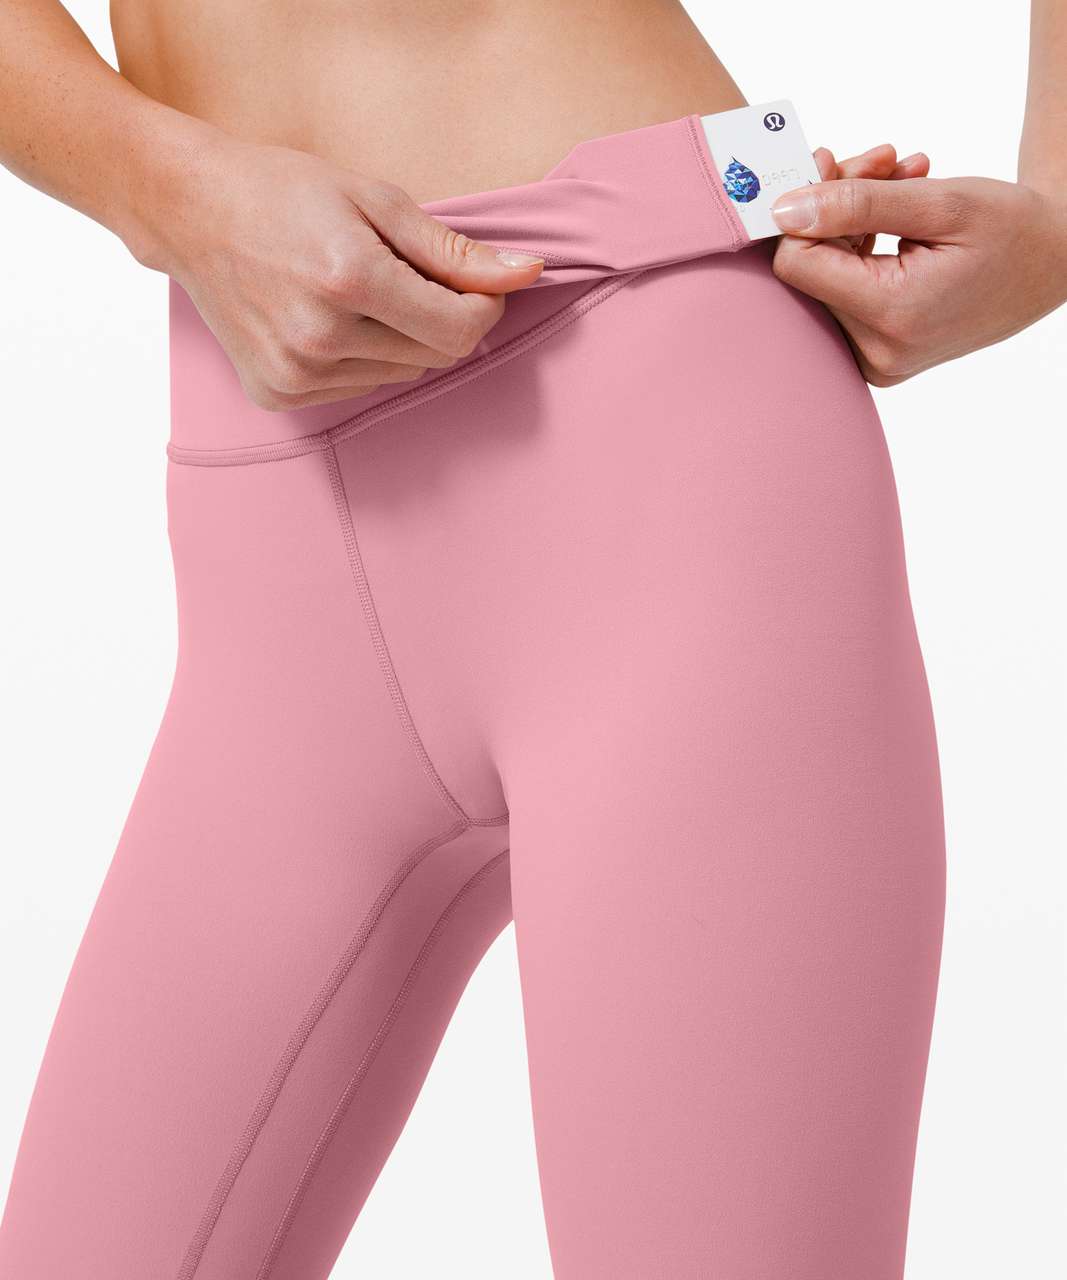 Lululemon Align Pant 28” Pink Size 2 - $75 (23% Off Retail) - From hayley